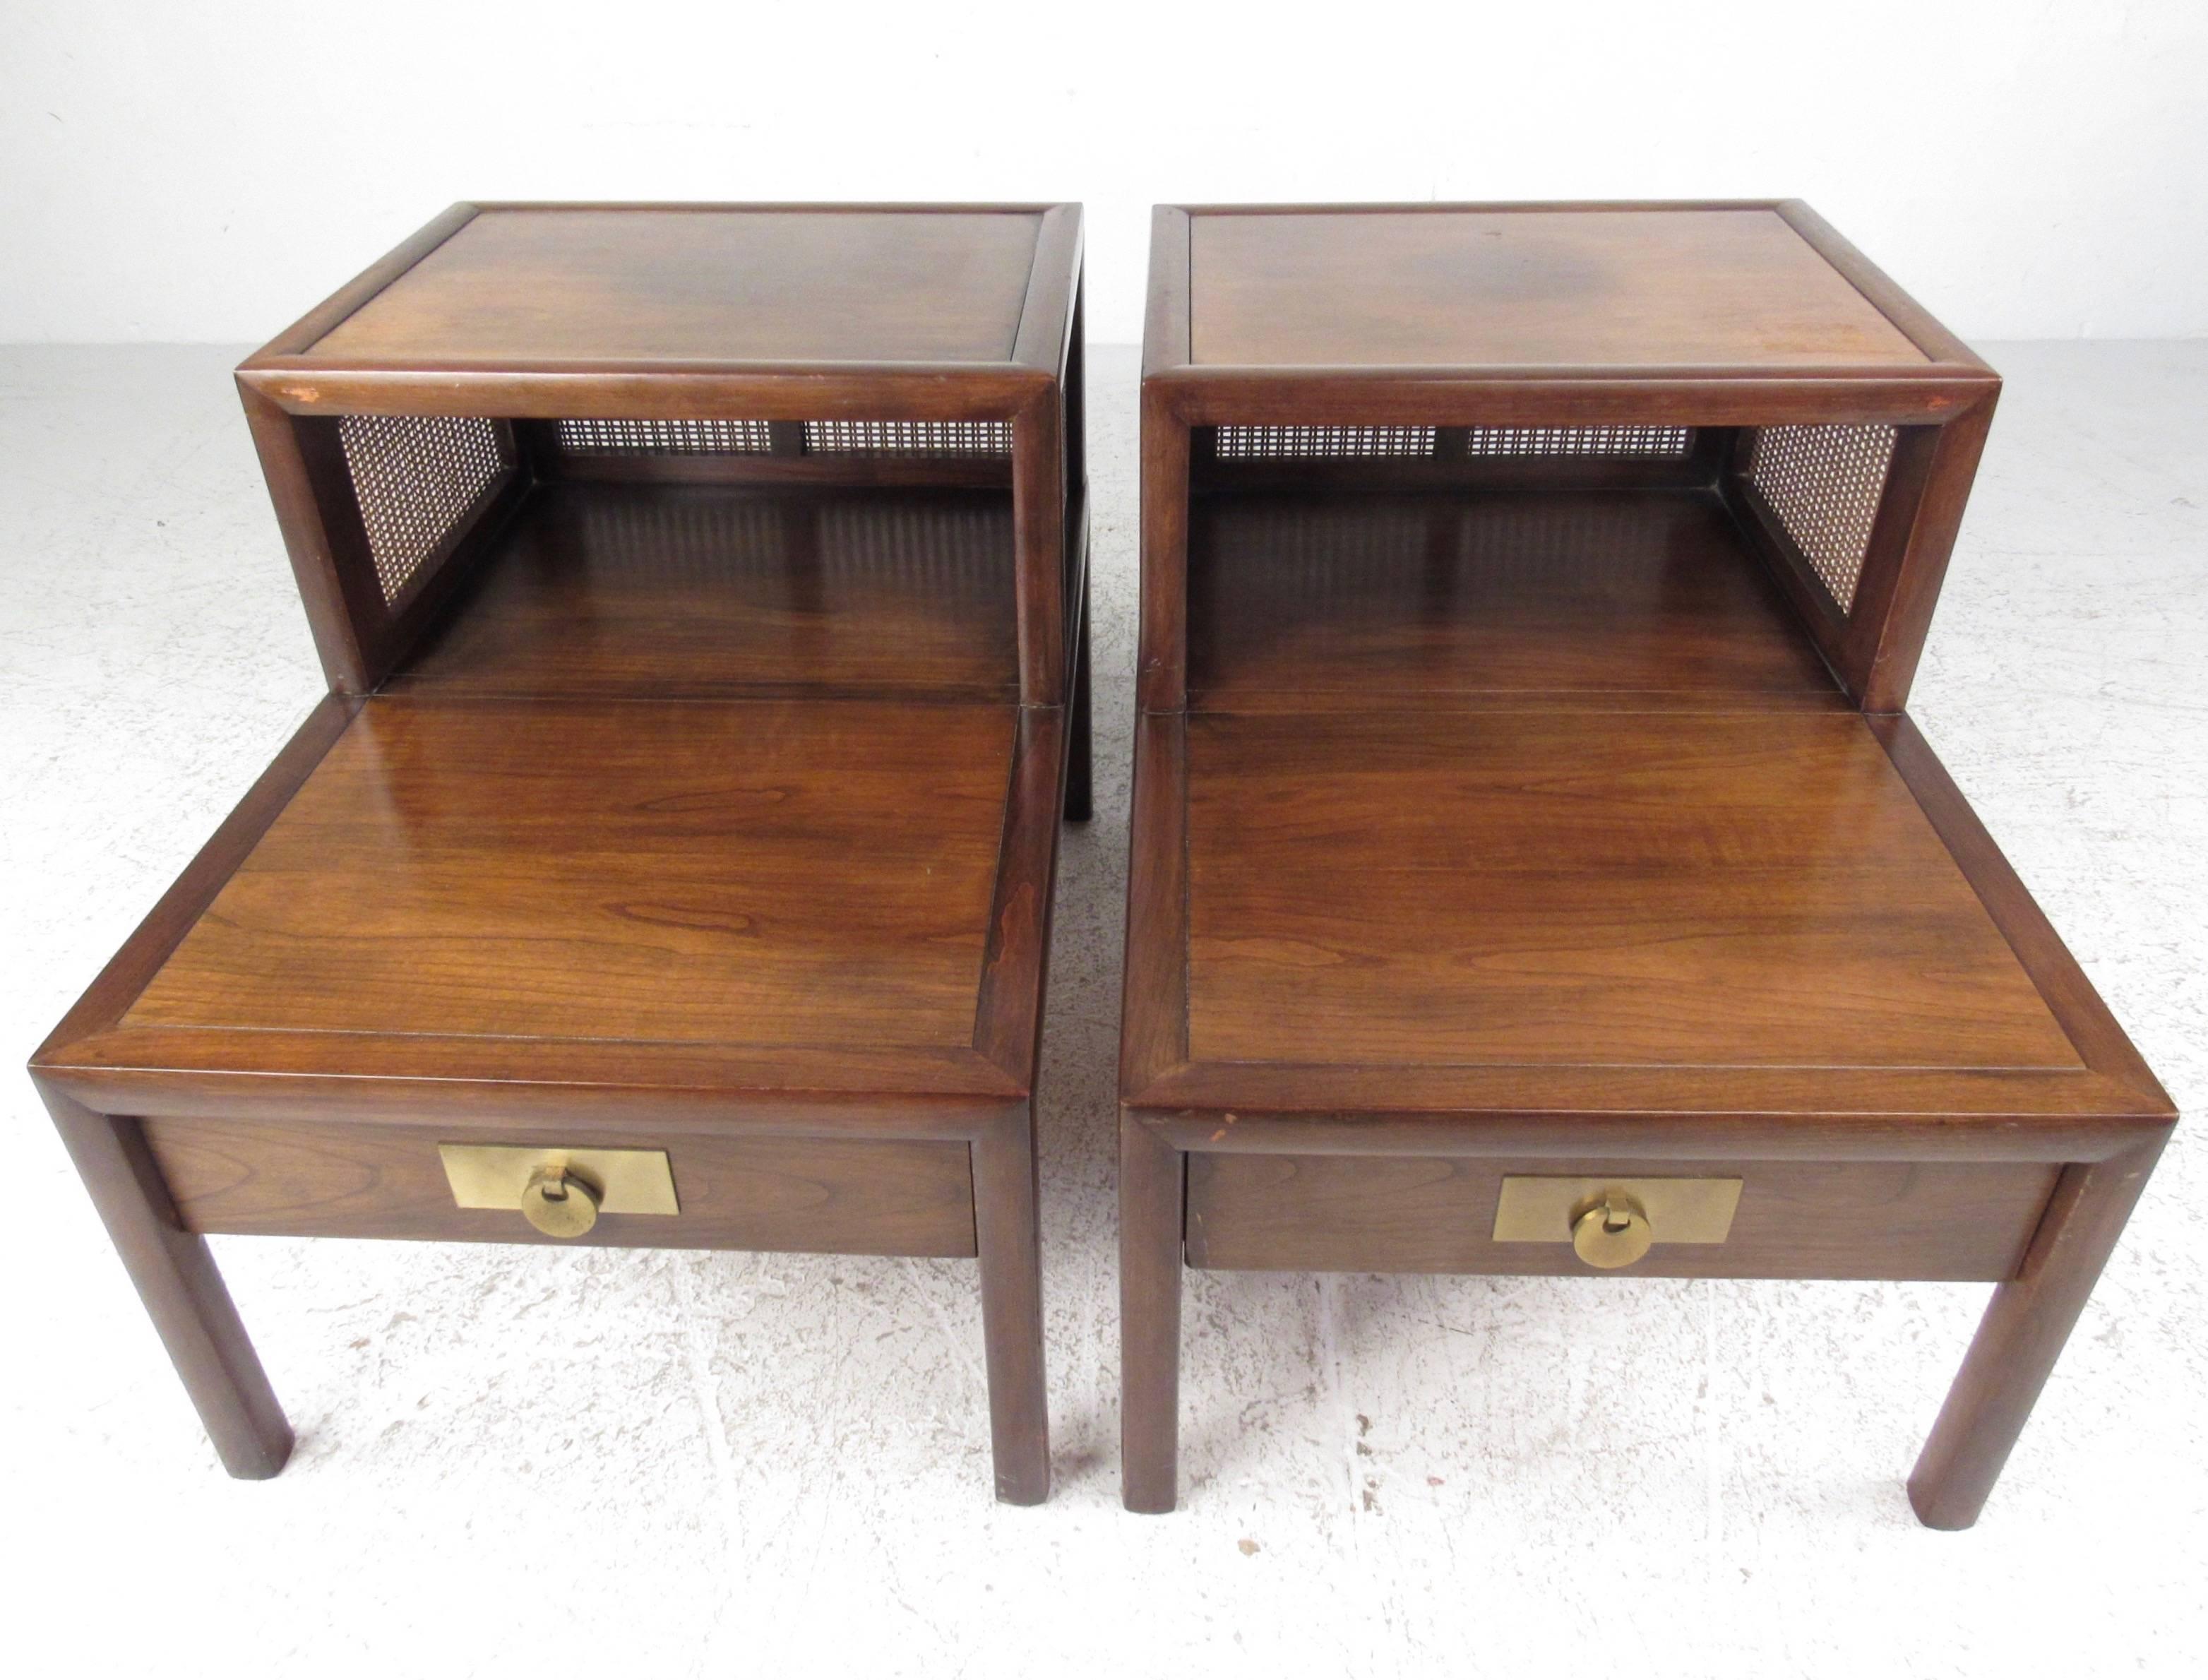 This unique pair of vintage end tables feature two-tier design, brass trim, and cane siding. Rich vintage wood finish makes these a wonderful set of lamp tables in any setting. Please confirm item location (NY or NJ).